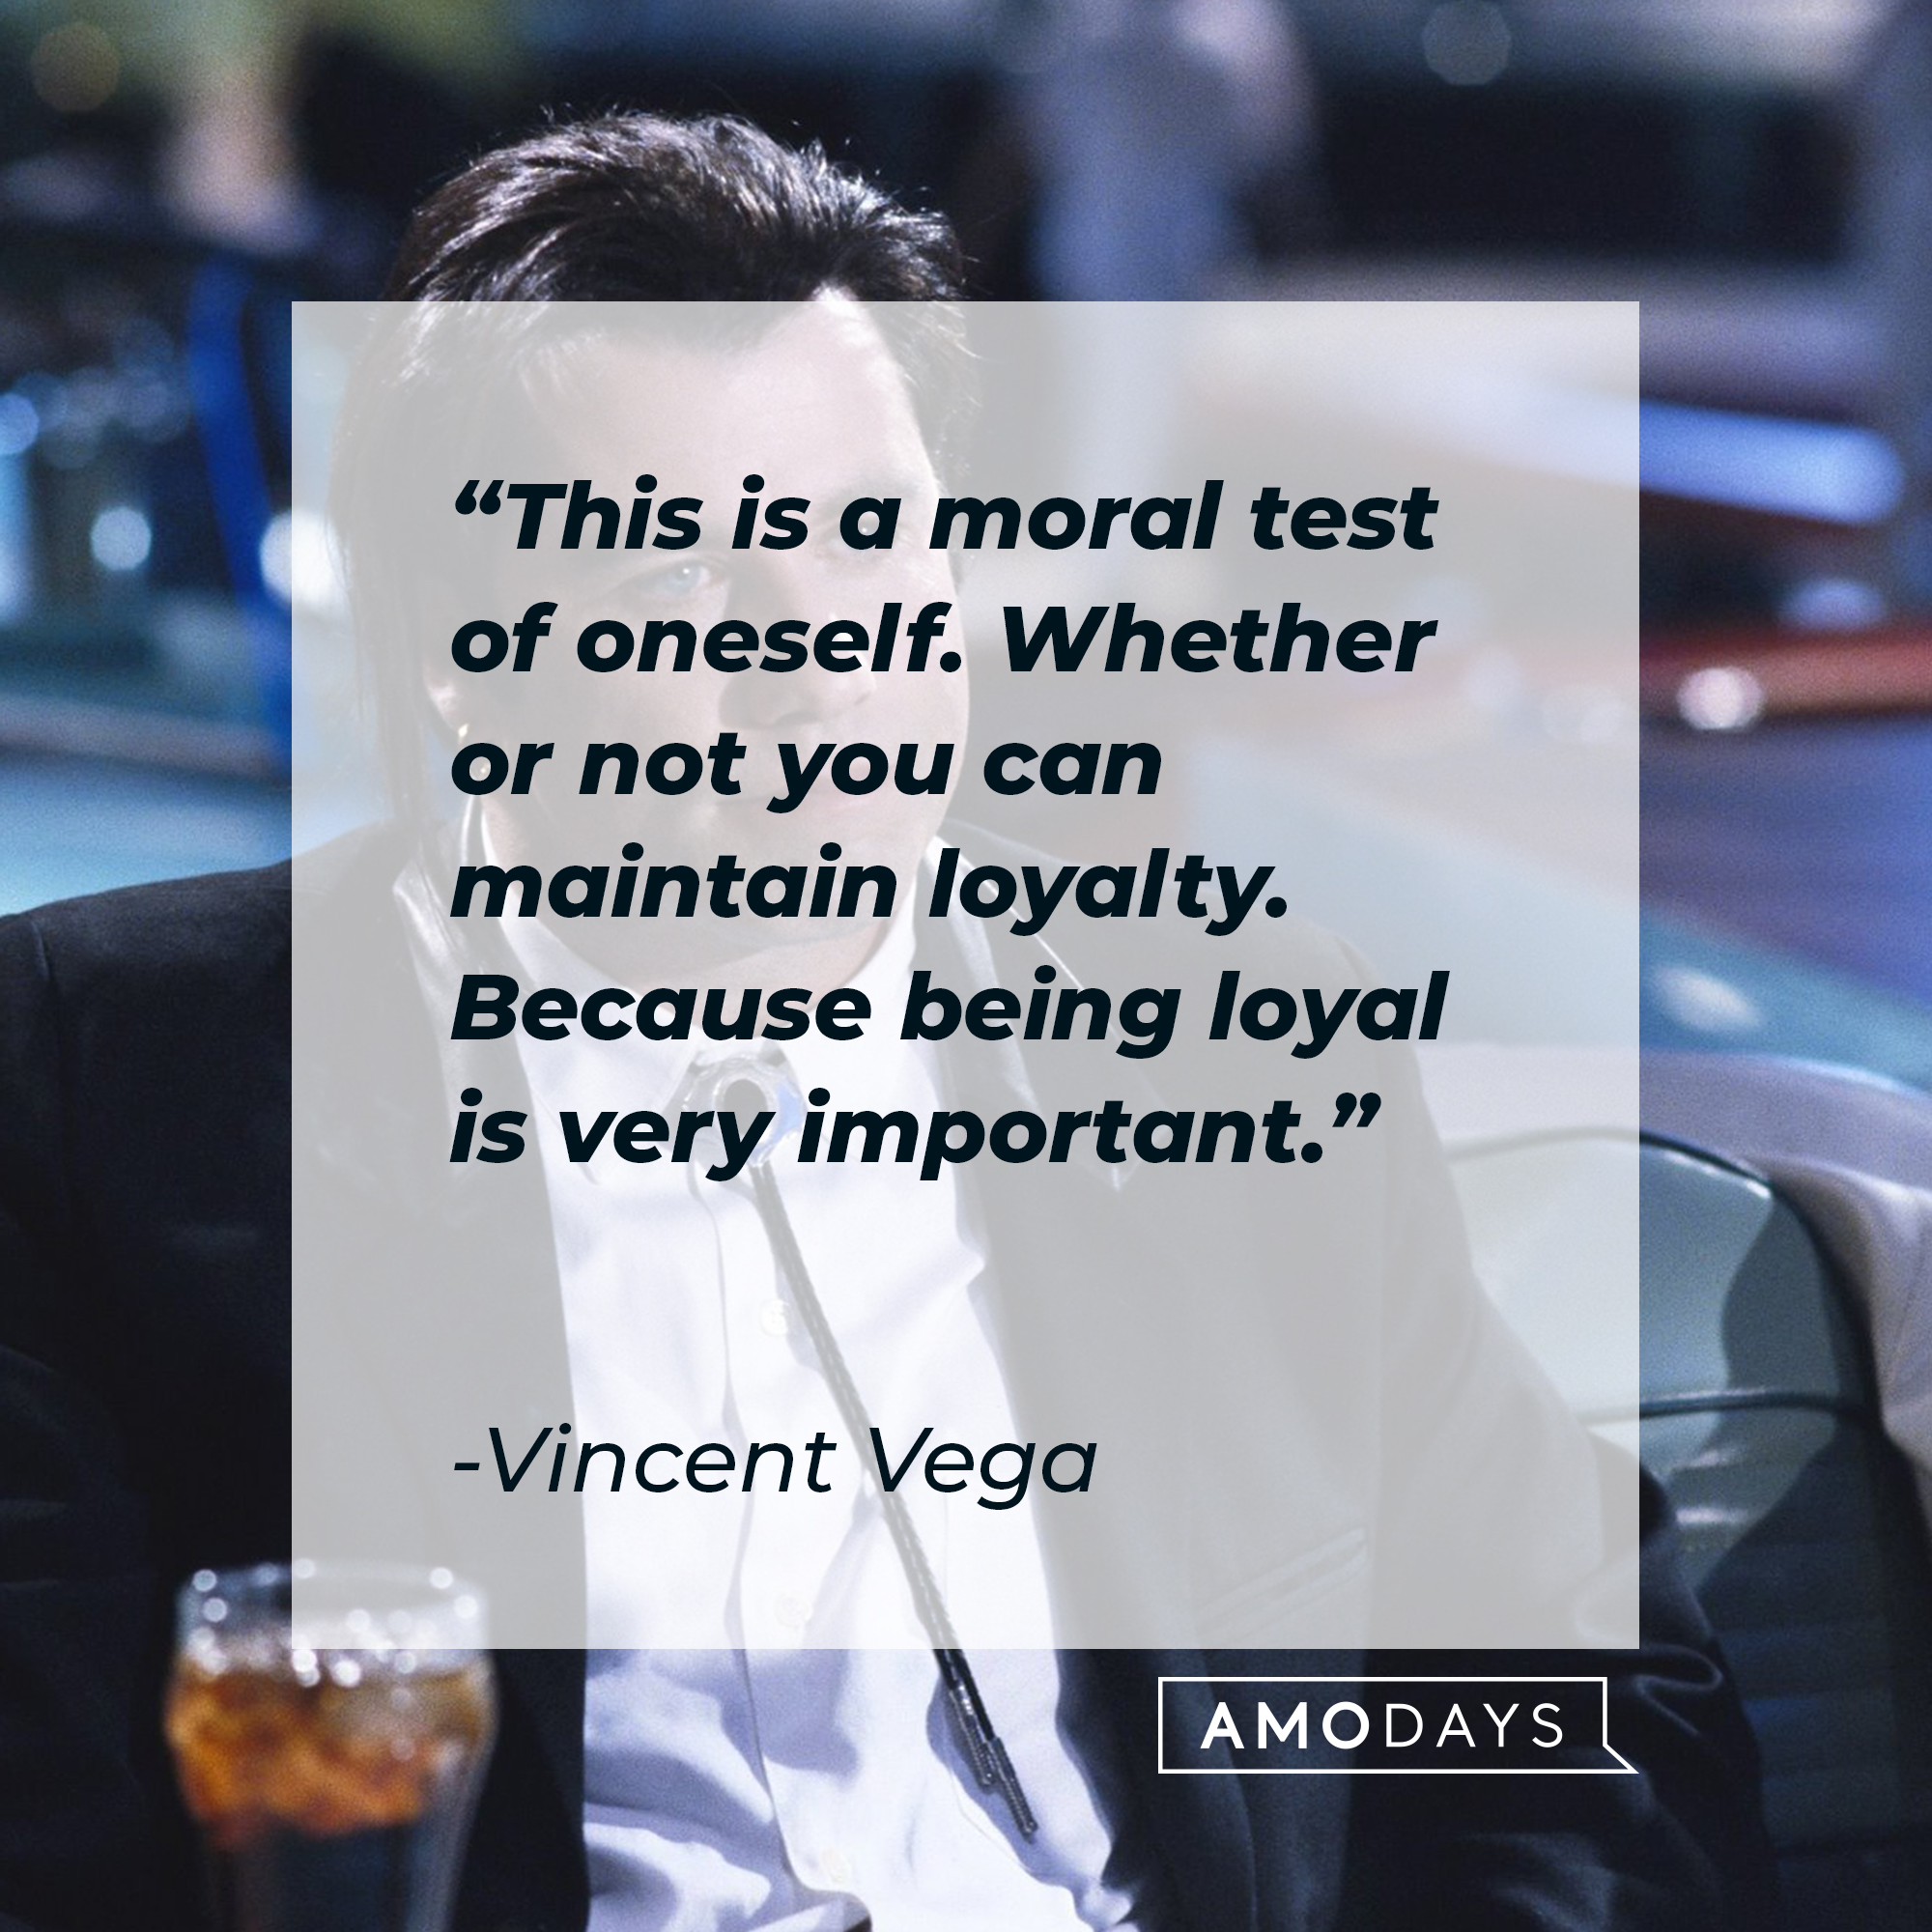 Vincent Vega, with his quote: "This is a moral test of oneself. Whether or not you can maintain loyalty. Because being loyal is very important." │Source: facebook.com/PulpFiction